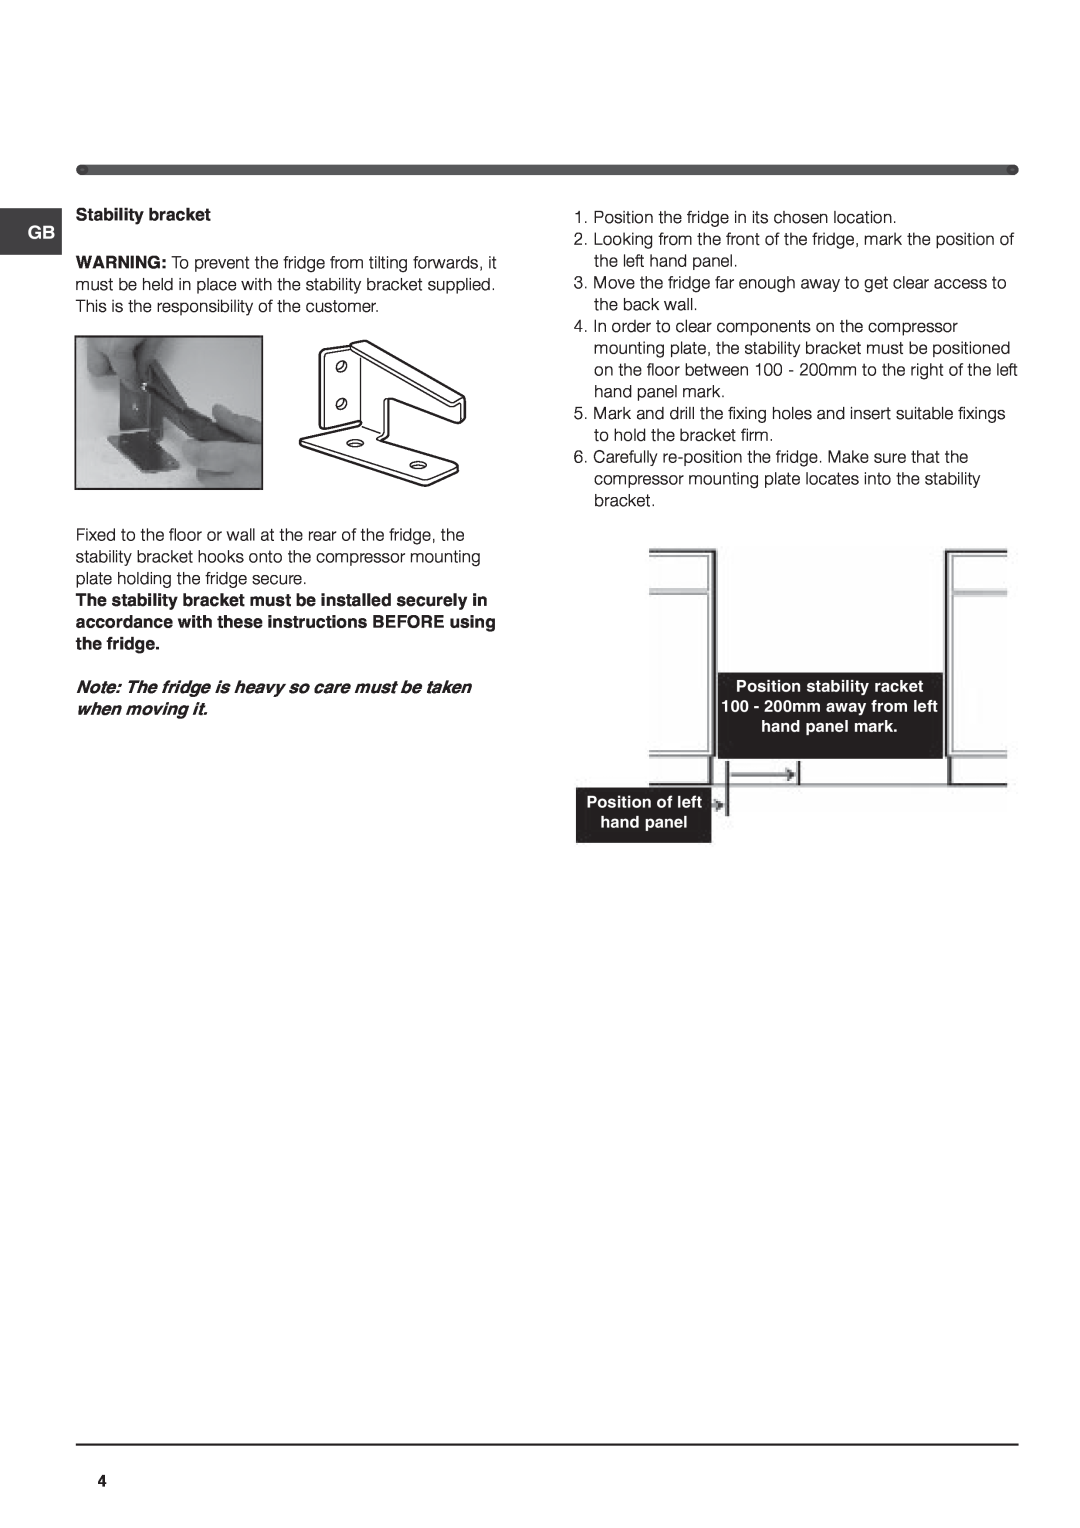 Hotpoint RLA175P operating instructions Stability bracket, Note The fridge is heavy so care must be taken when moving it 